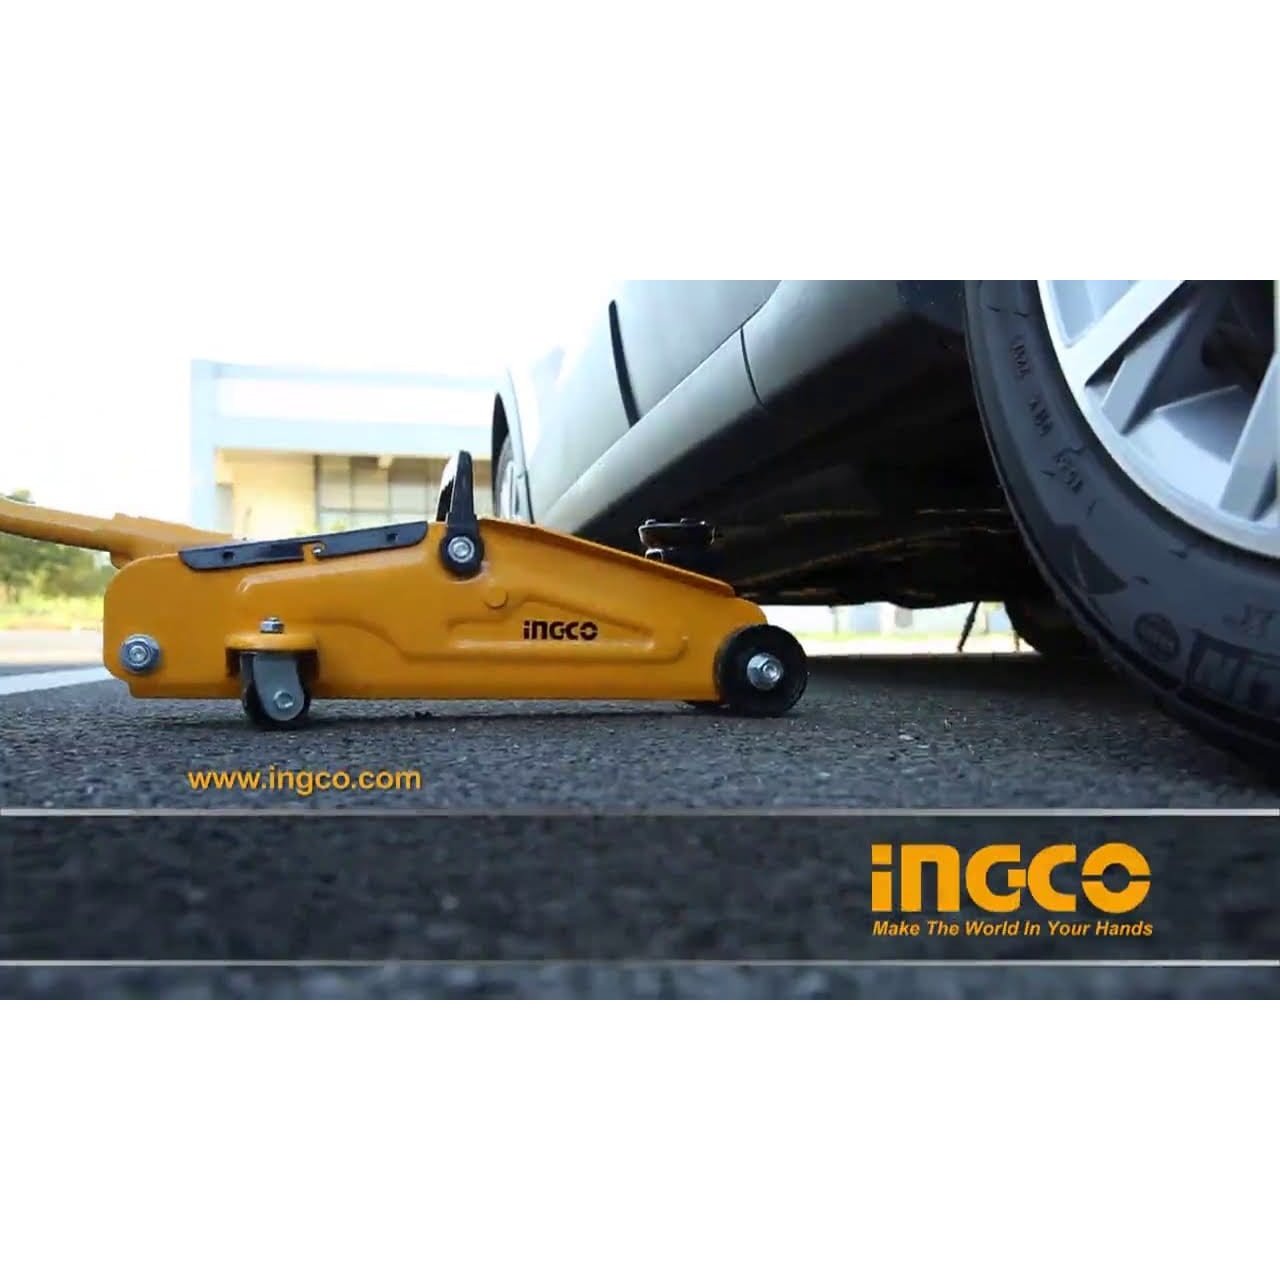 Ingco Hydraulic Floor Jack | Shop Online in Accra, Ghana - Supply Master Towing and Lifting Buy Tools hardware Building materials